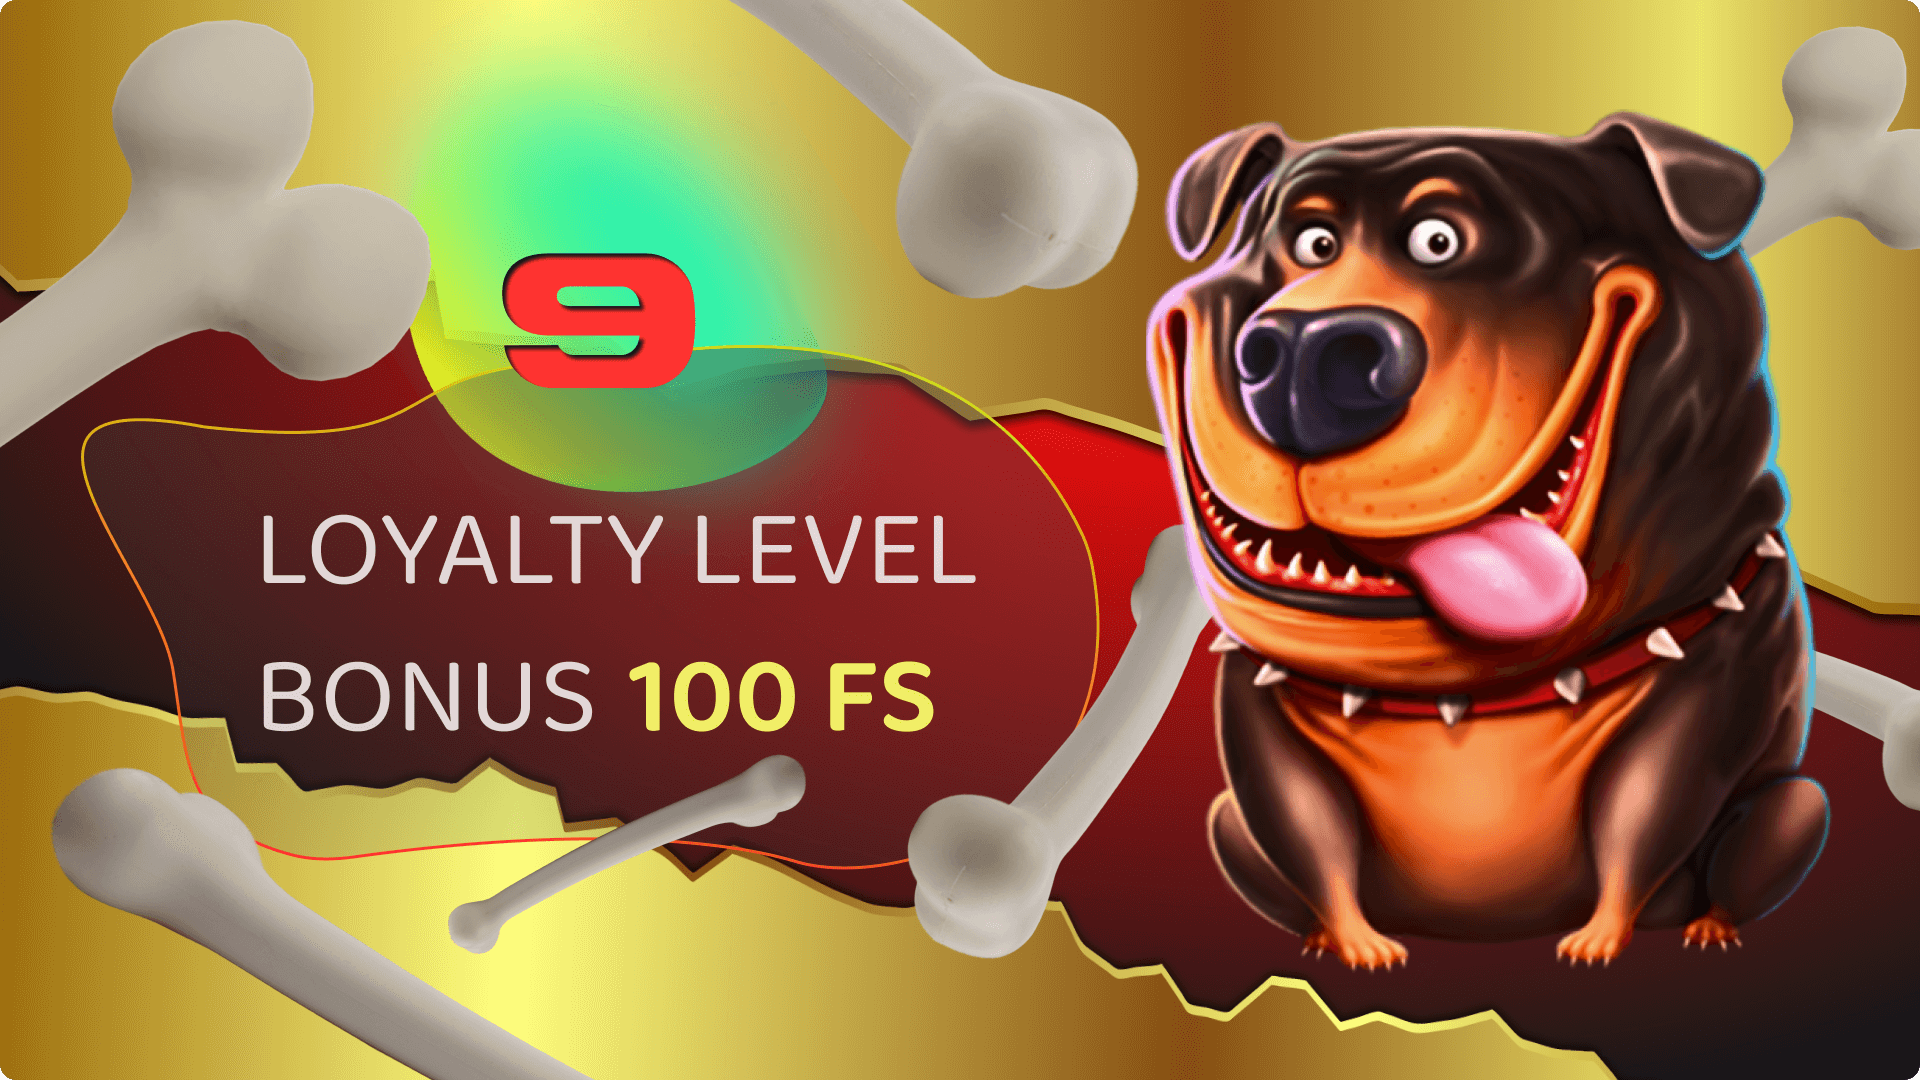 100 FS for 9 loyalty level